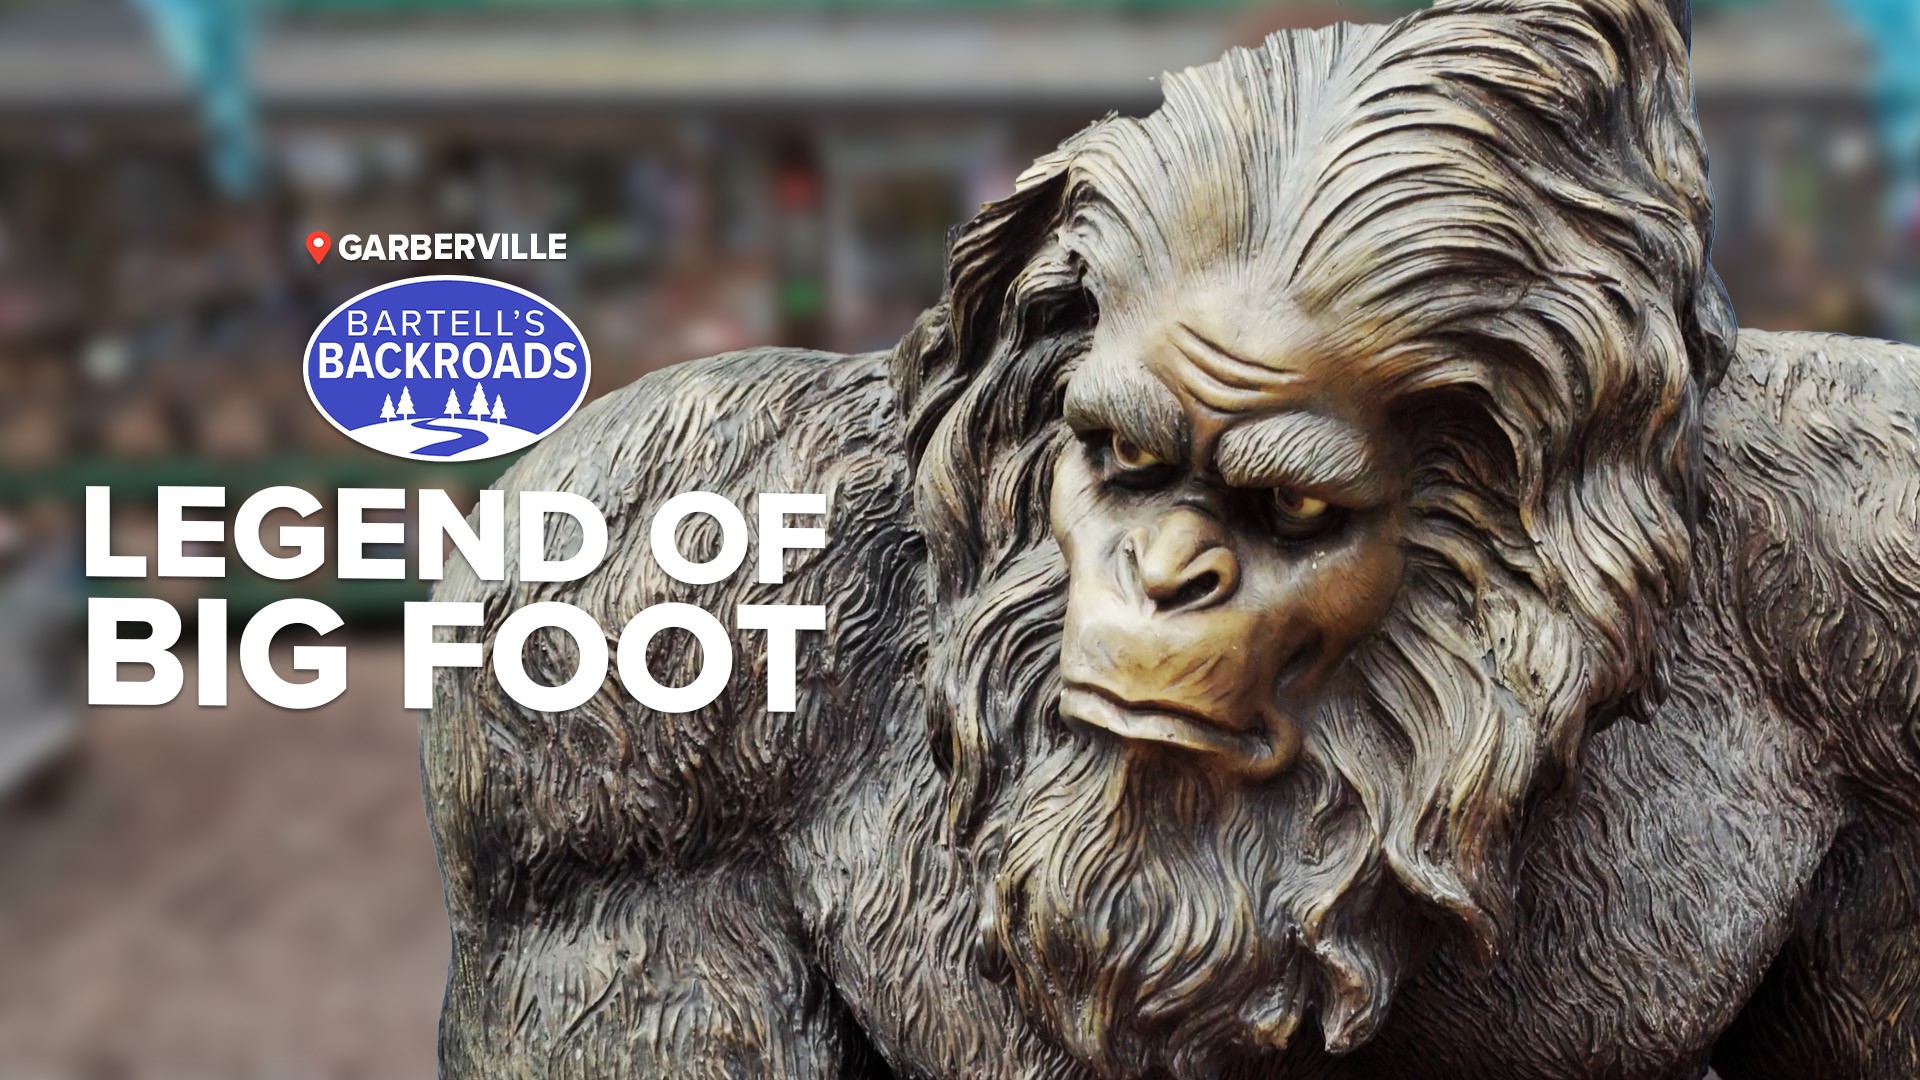 See Bigfoot and his friends at this historic roadside attraction.